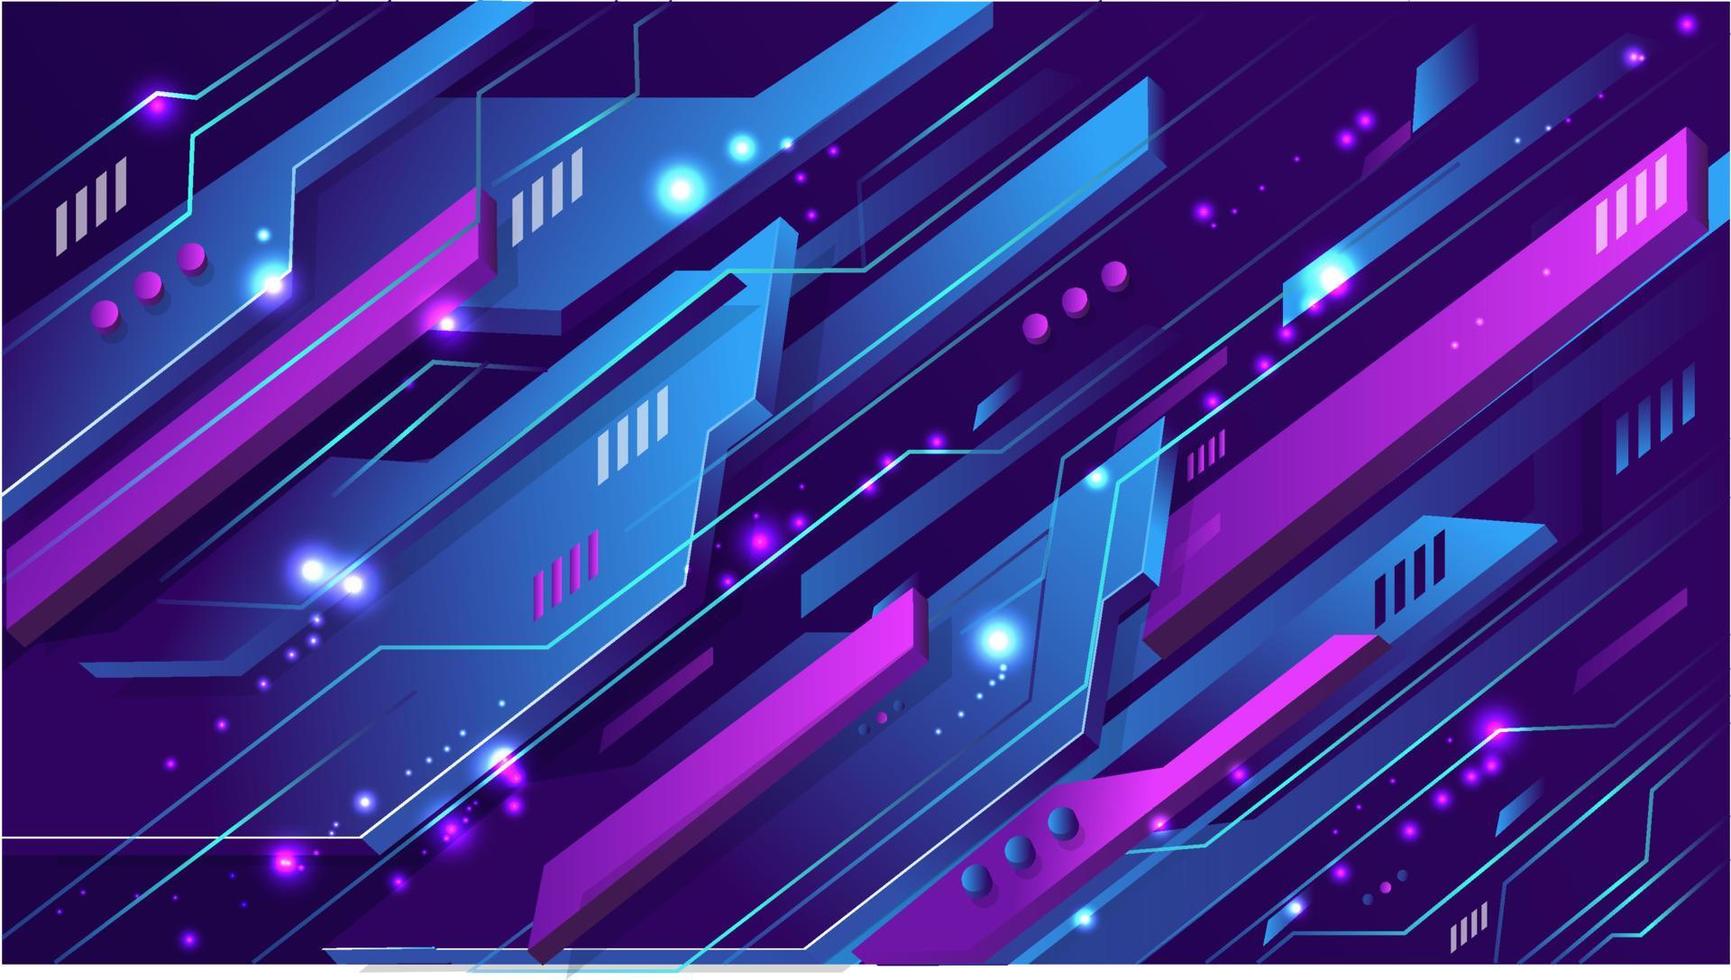 Creative geometric shapes abstract 3d purple circuit technology business background vector